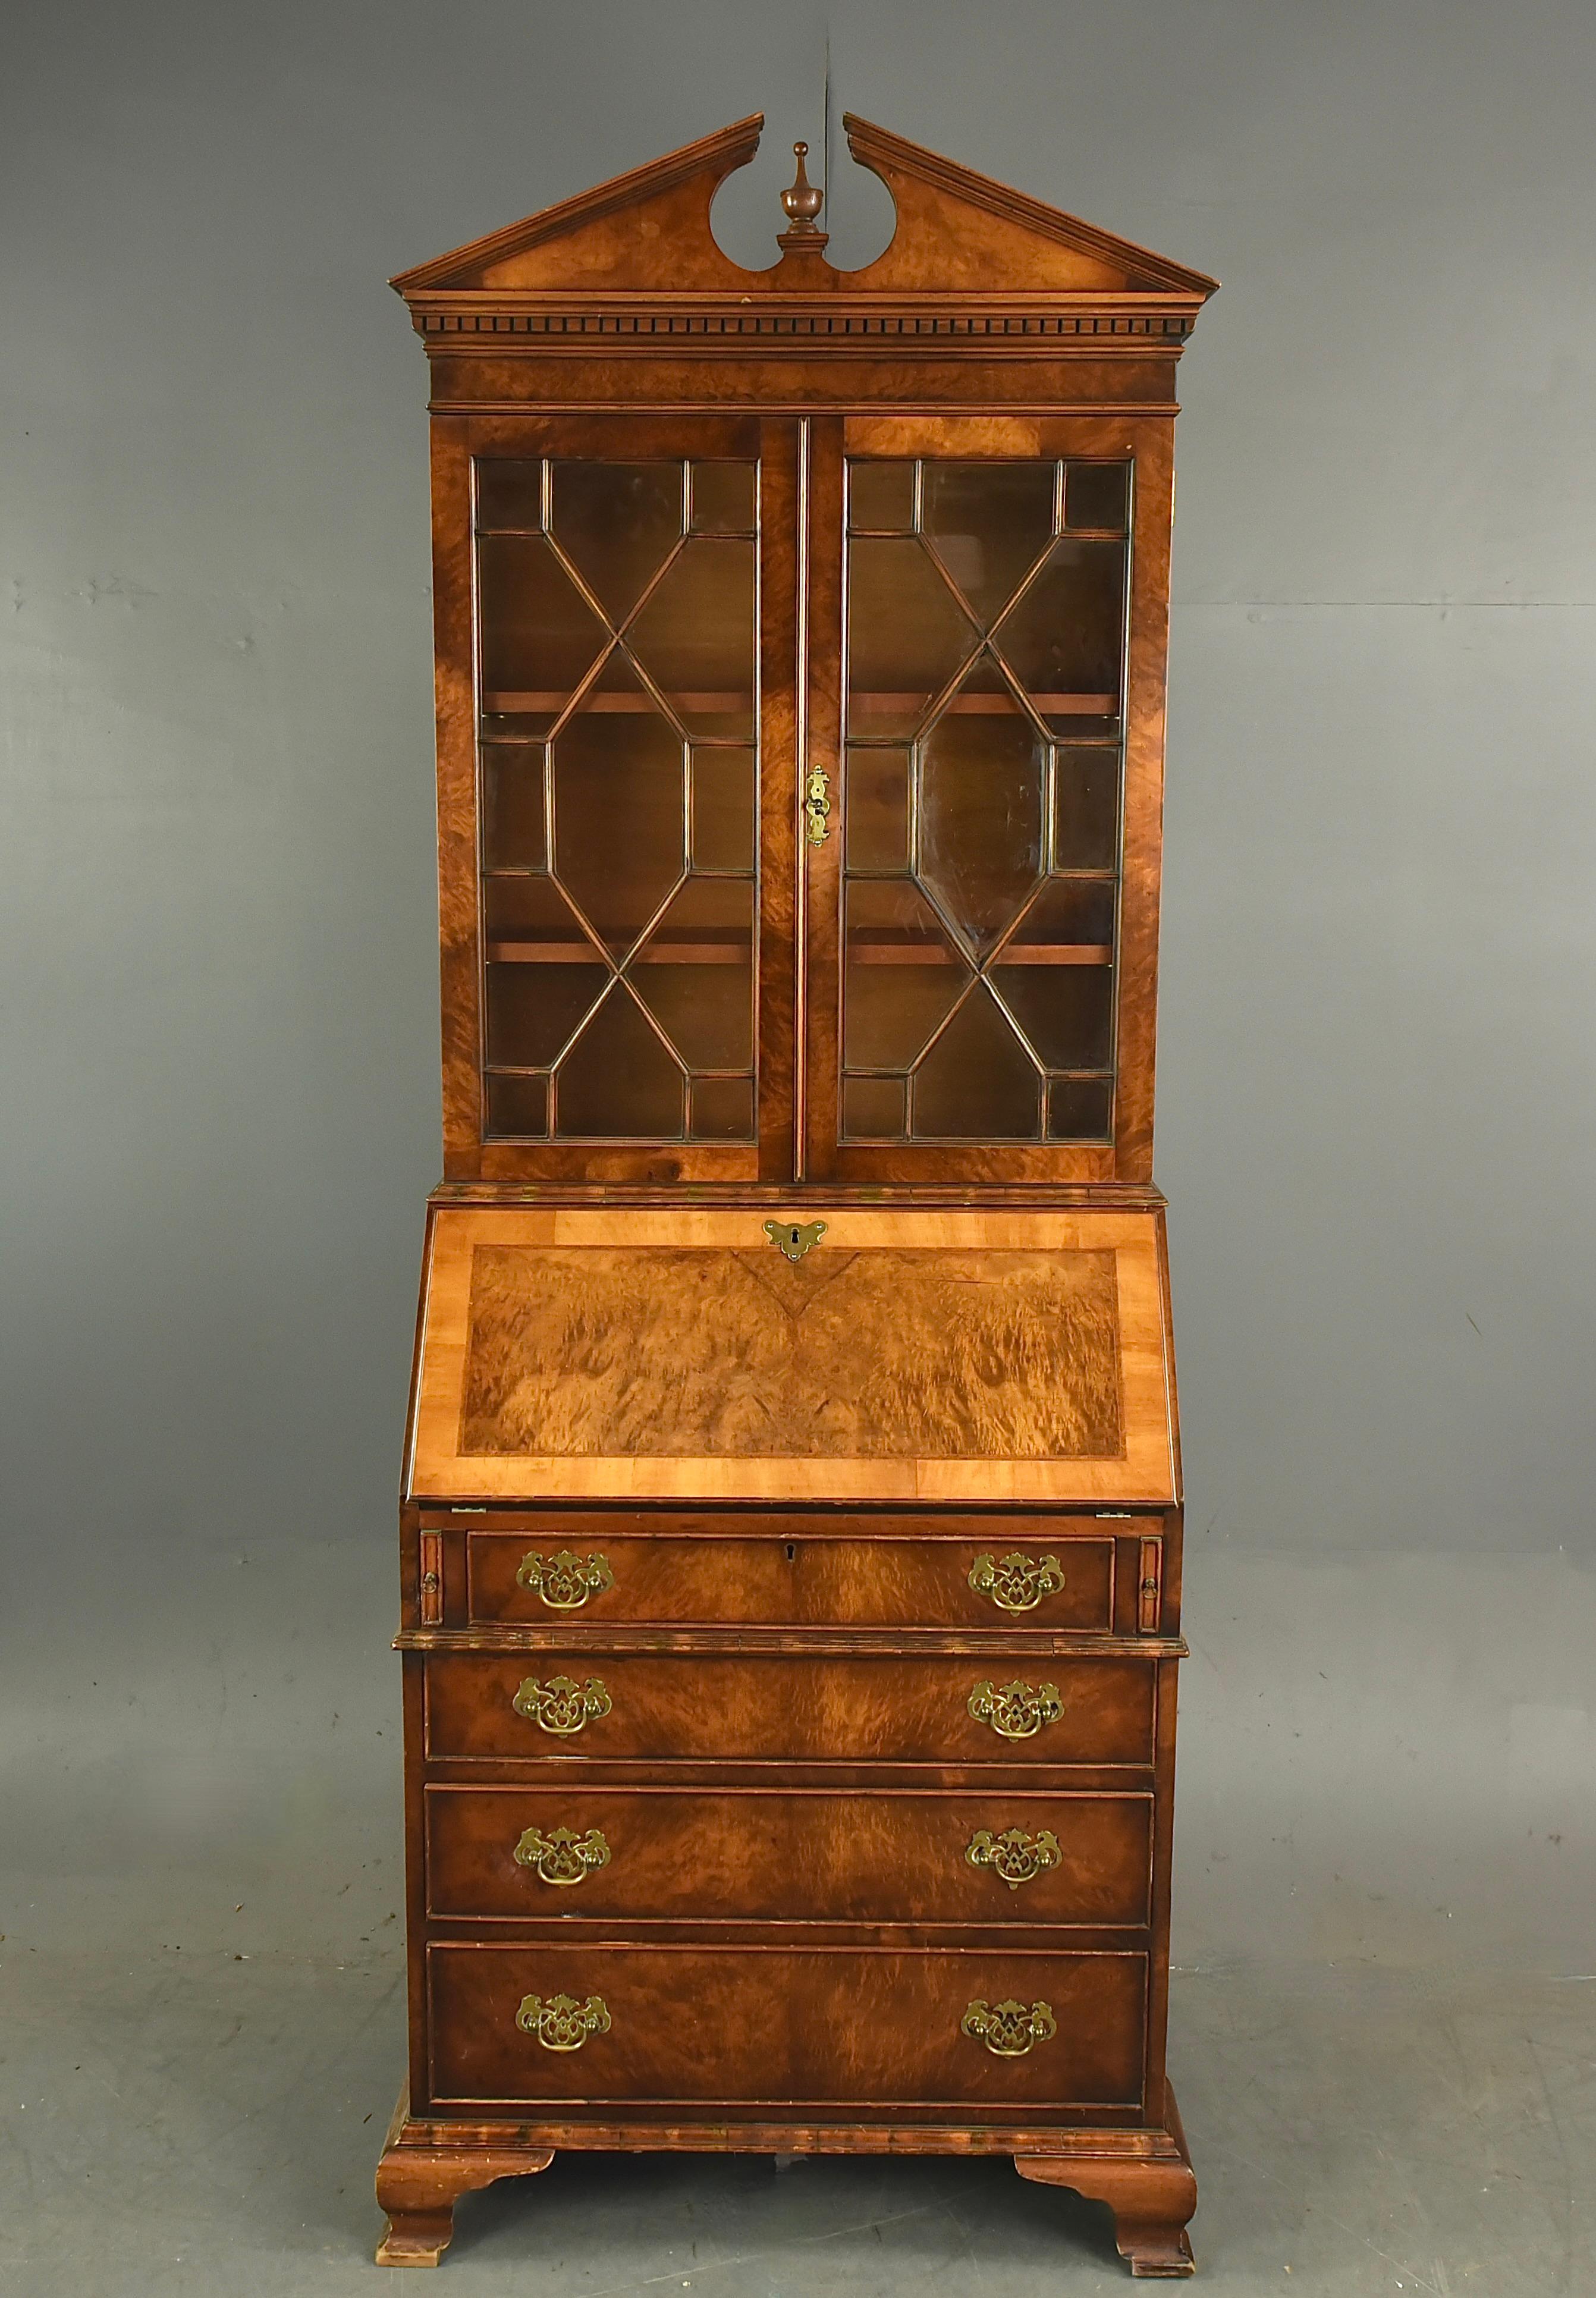 Fine Quality burr walnut bureau bookcase by Brights of nettlebeds circa 1960 .
The bookcase is a well proportioned small size the top with an architectural cornice ,the top has two adjustable shelves .behind two astragal glazed doors with a working